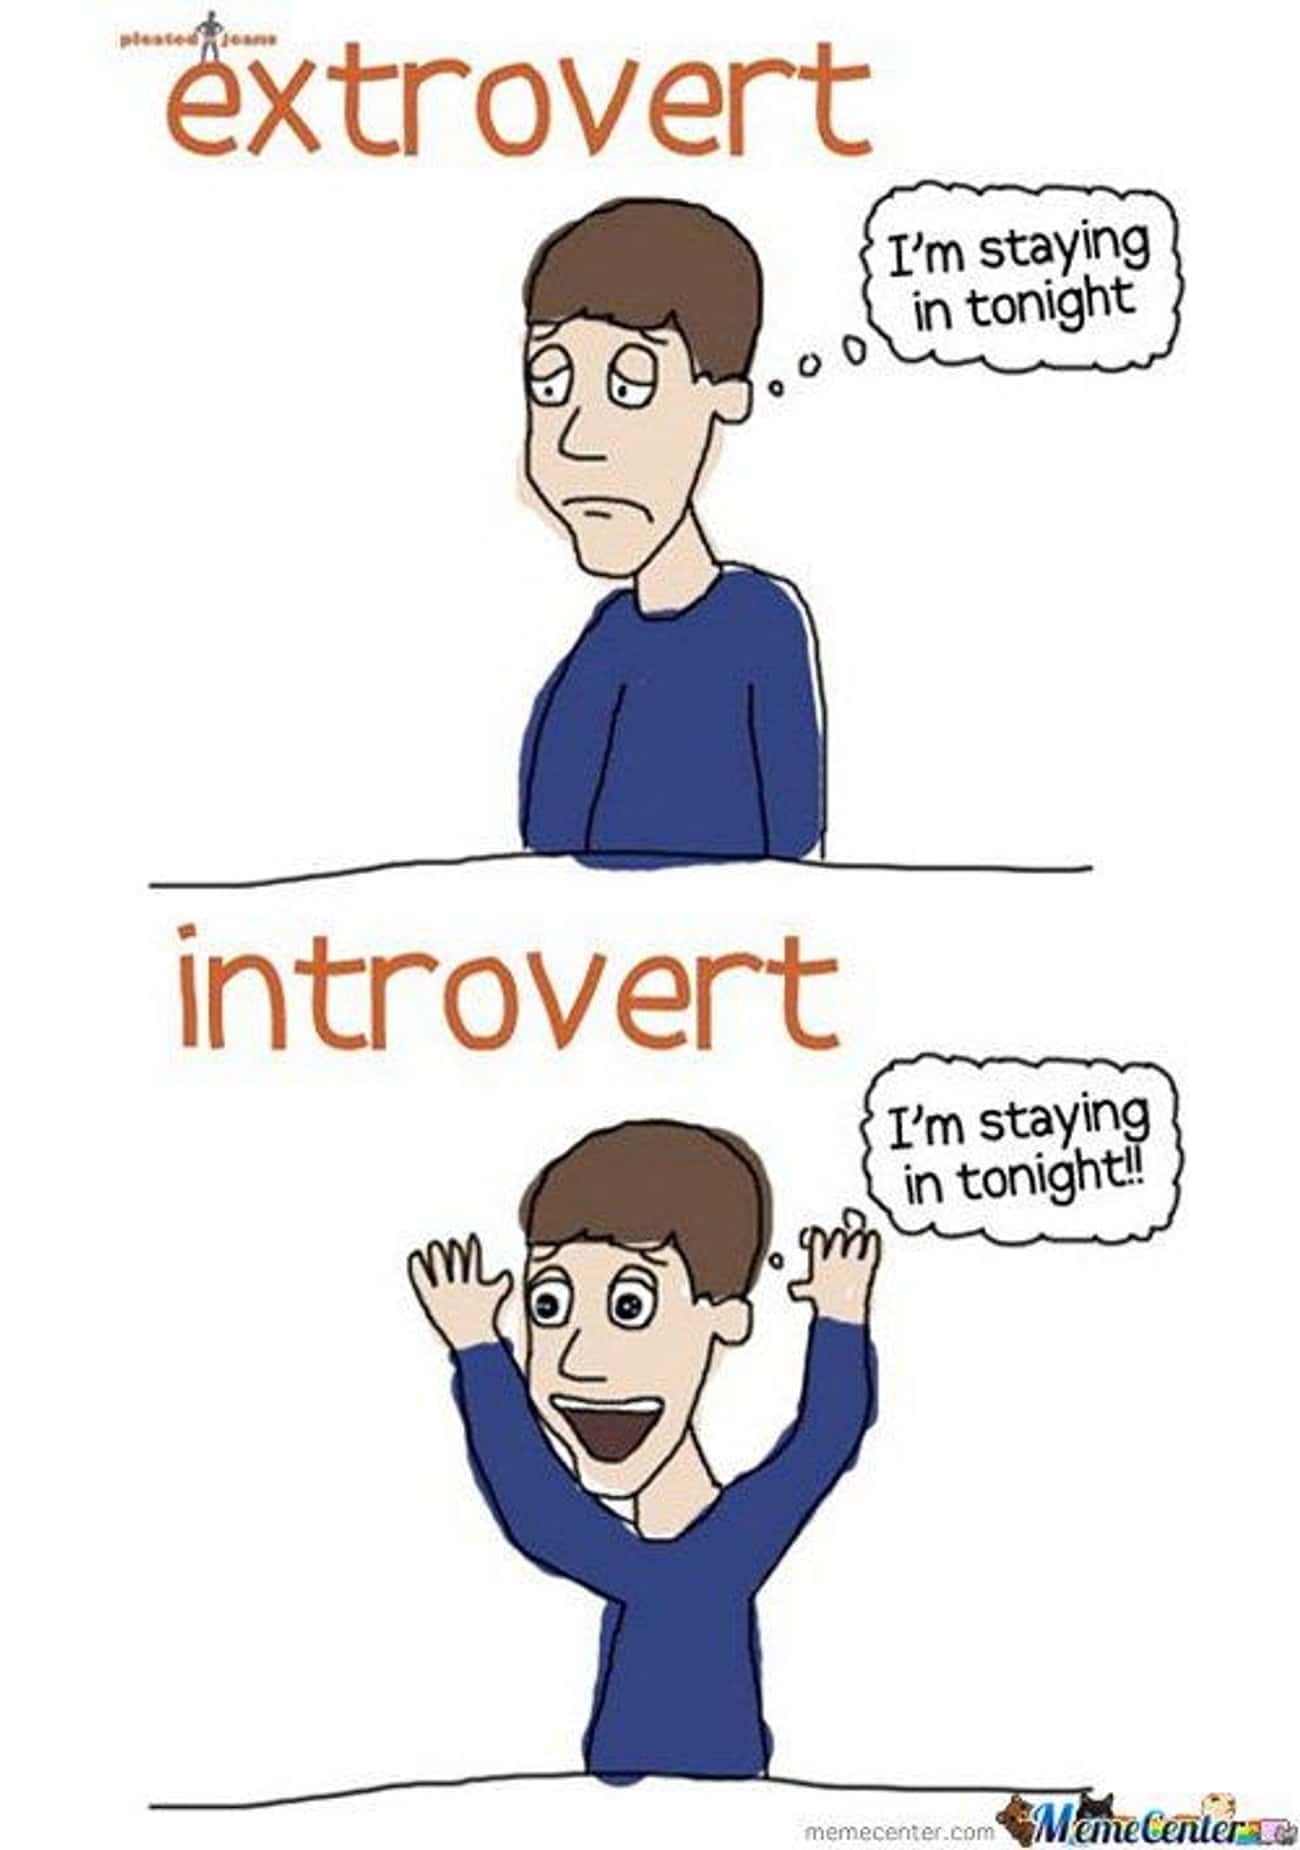 Extroverts vs. introverts